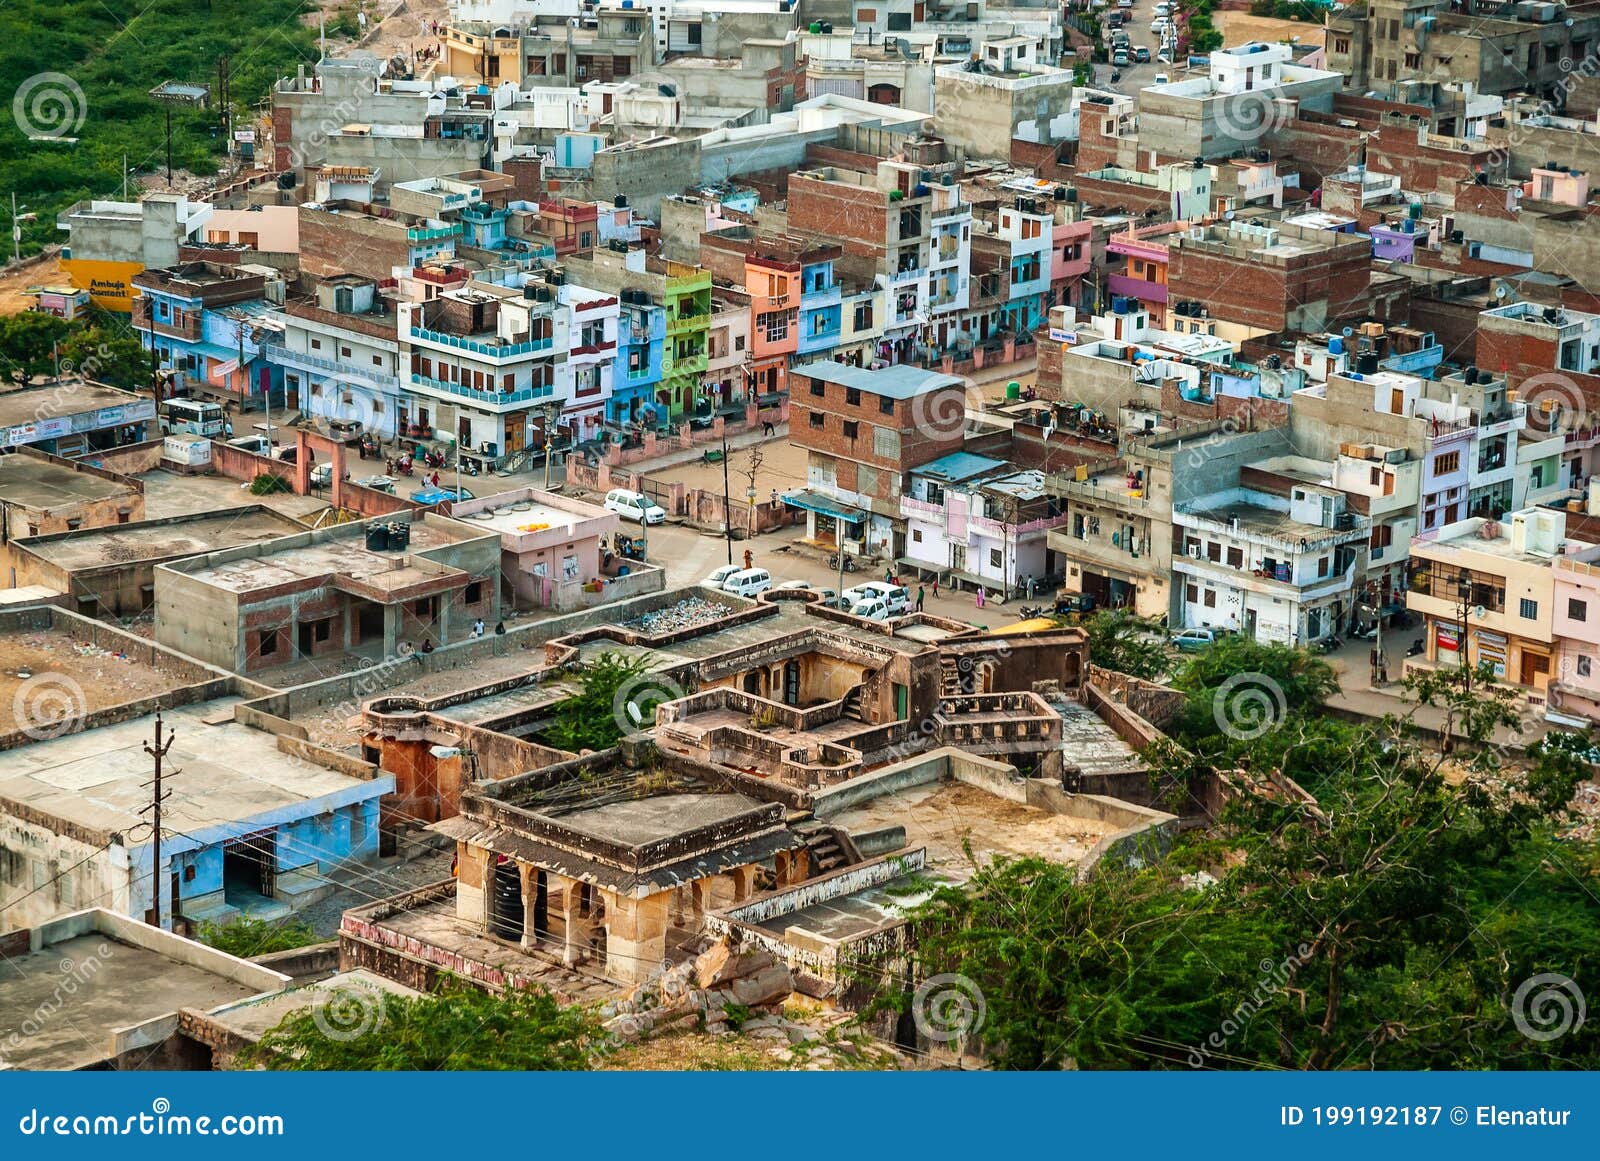 view of the outskirts of the city, jaipur, rajasthan, india